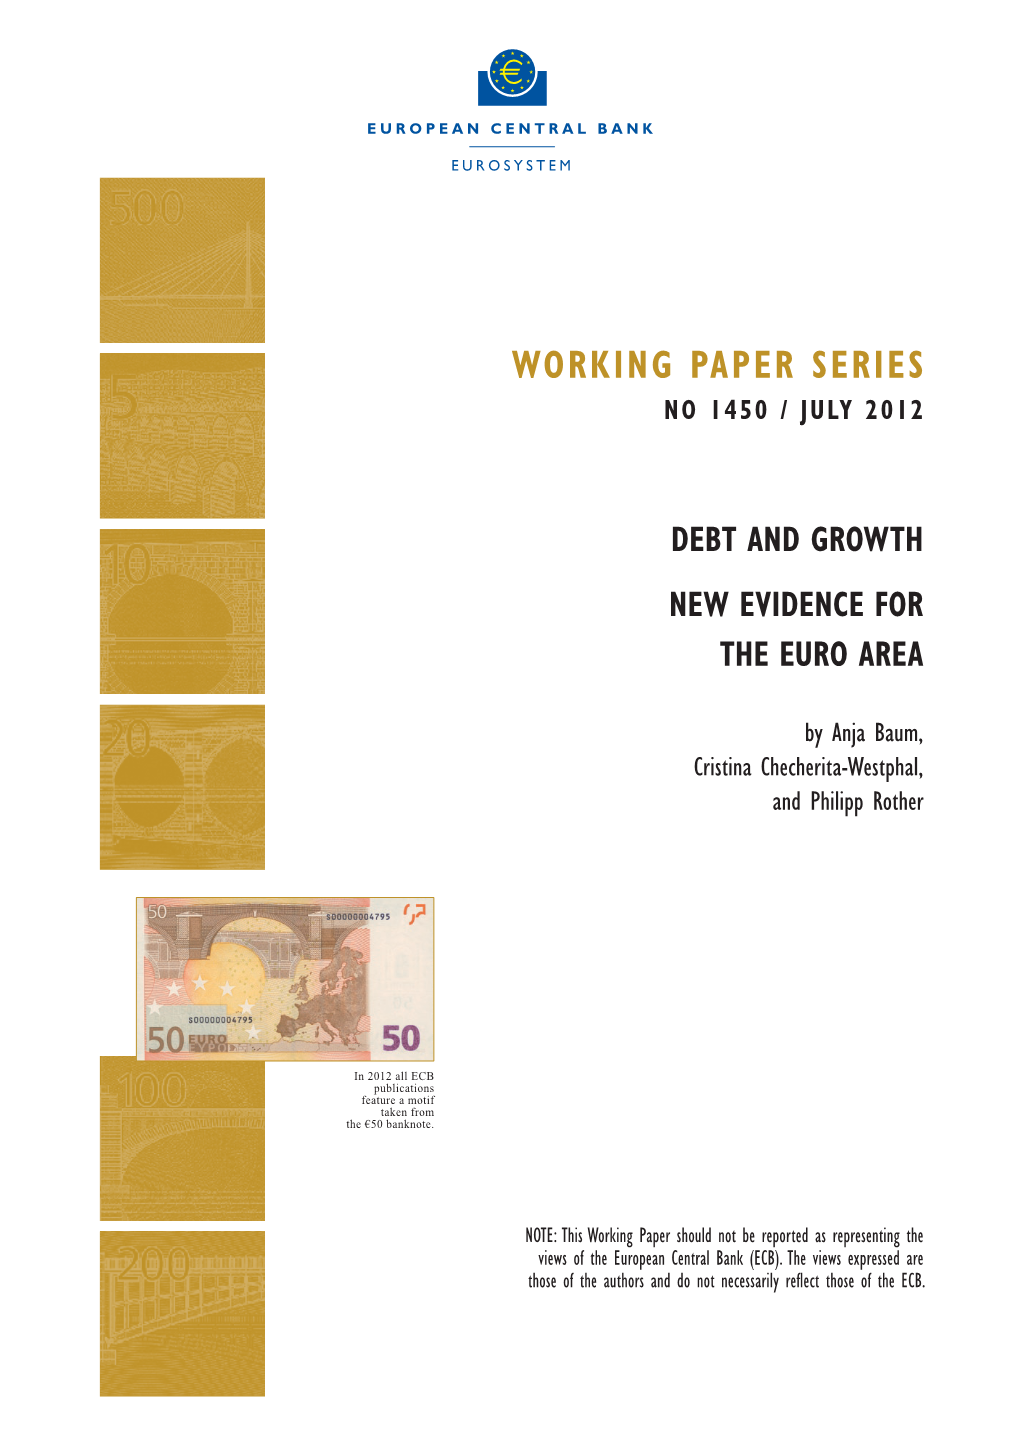 Debt and Growth: New Evidence for the Euro Area